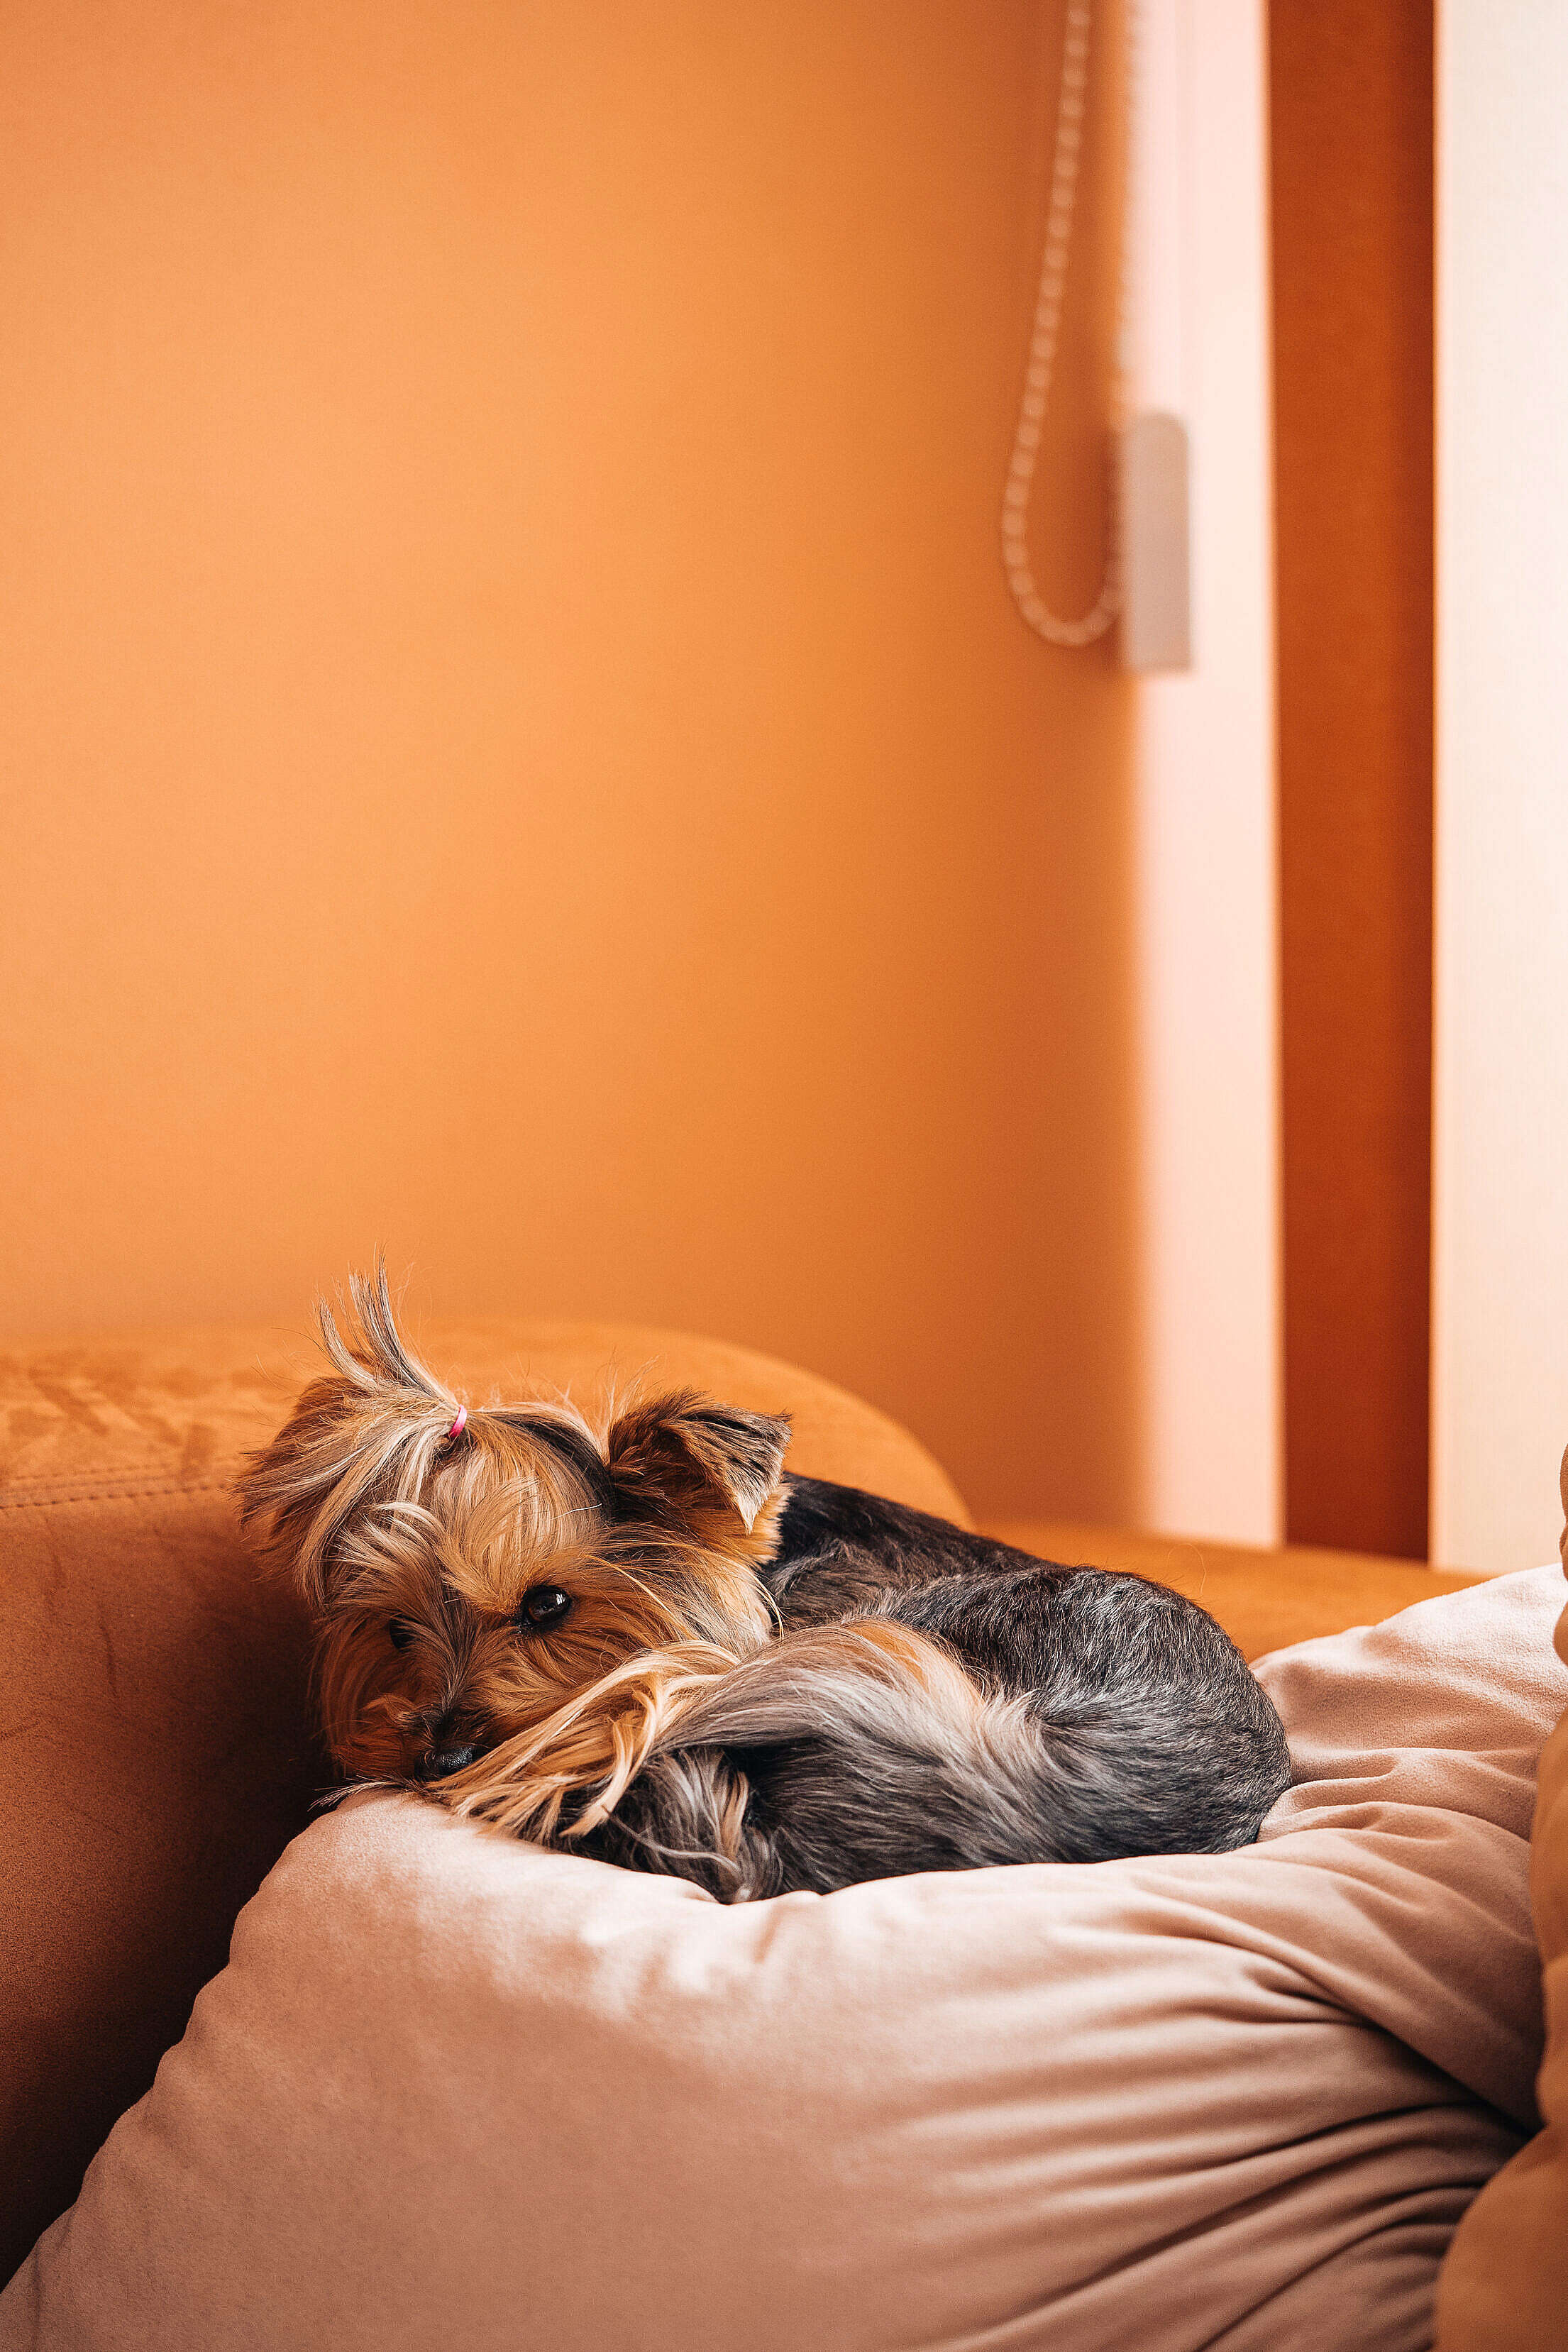 Cute Dog Jessie Relaxing on a Pillow Free Stock Photo